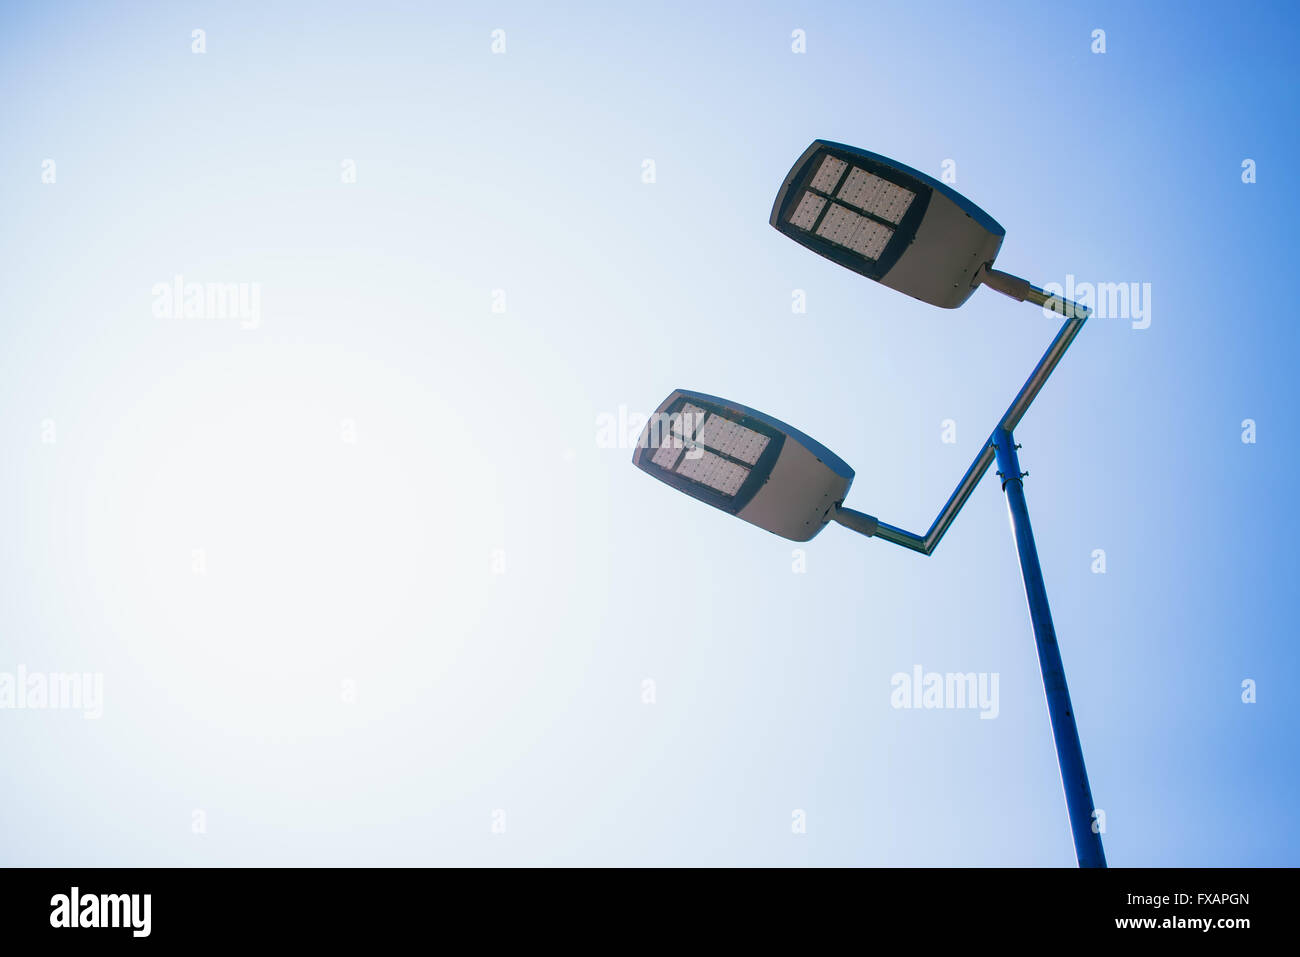 Outdoor basketball court led lighting equipment against clear blue sky. Stock Photo